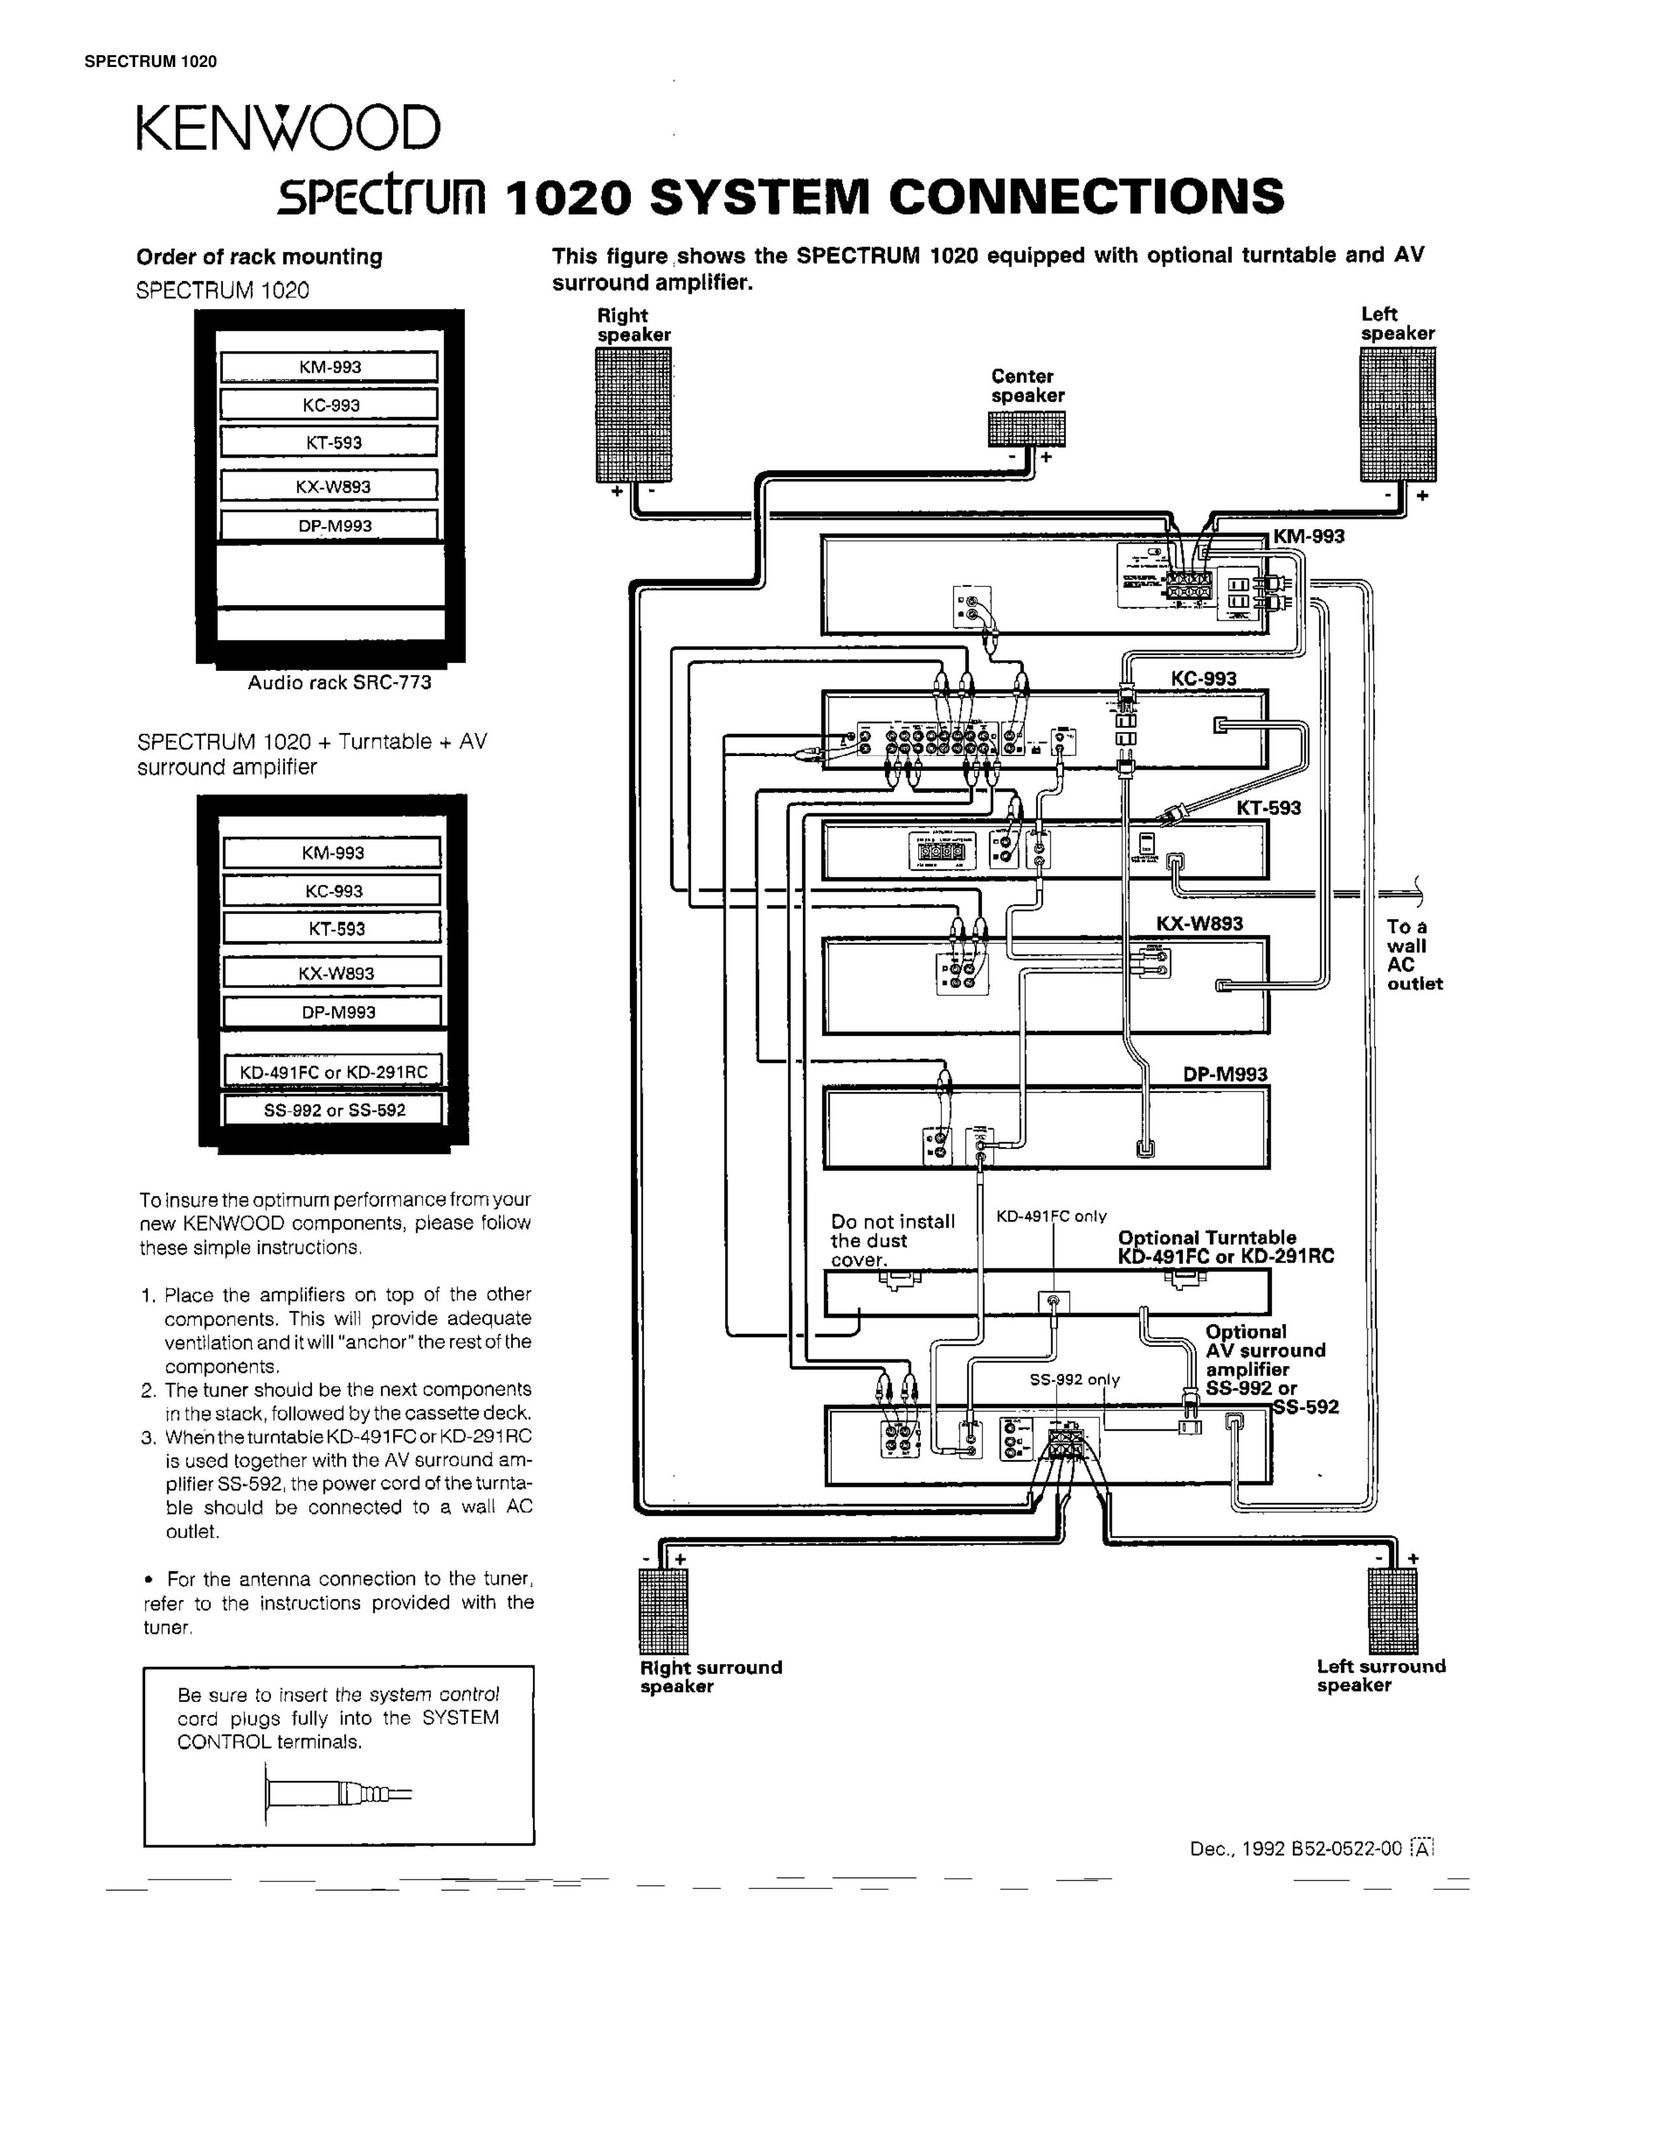 Kenwood CP-M993 Stereo Receiver User Manual